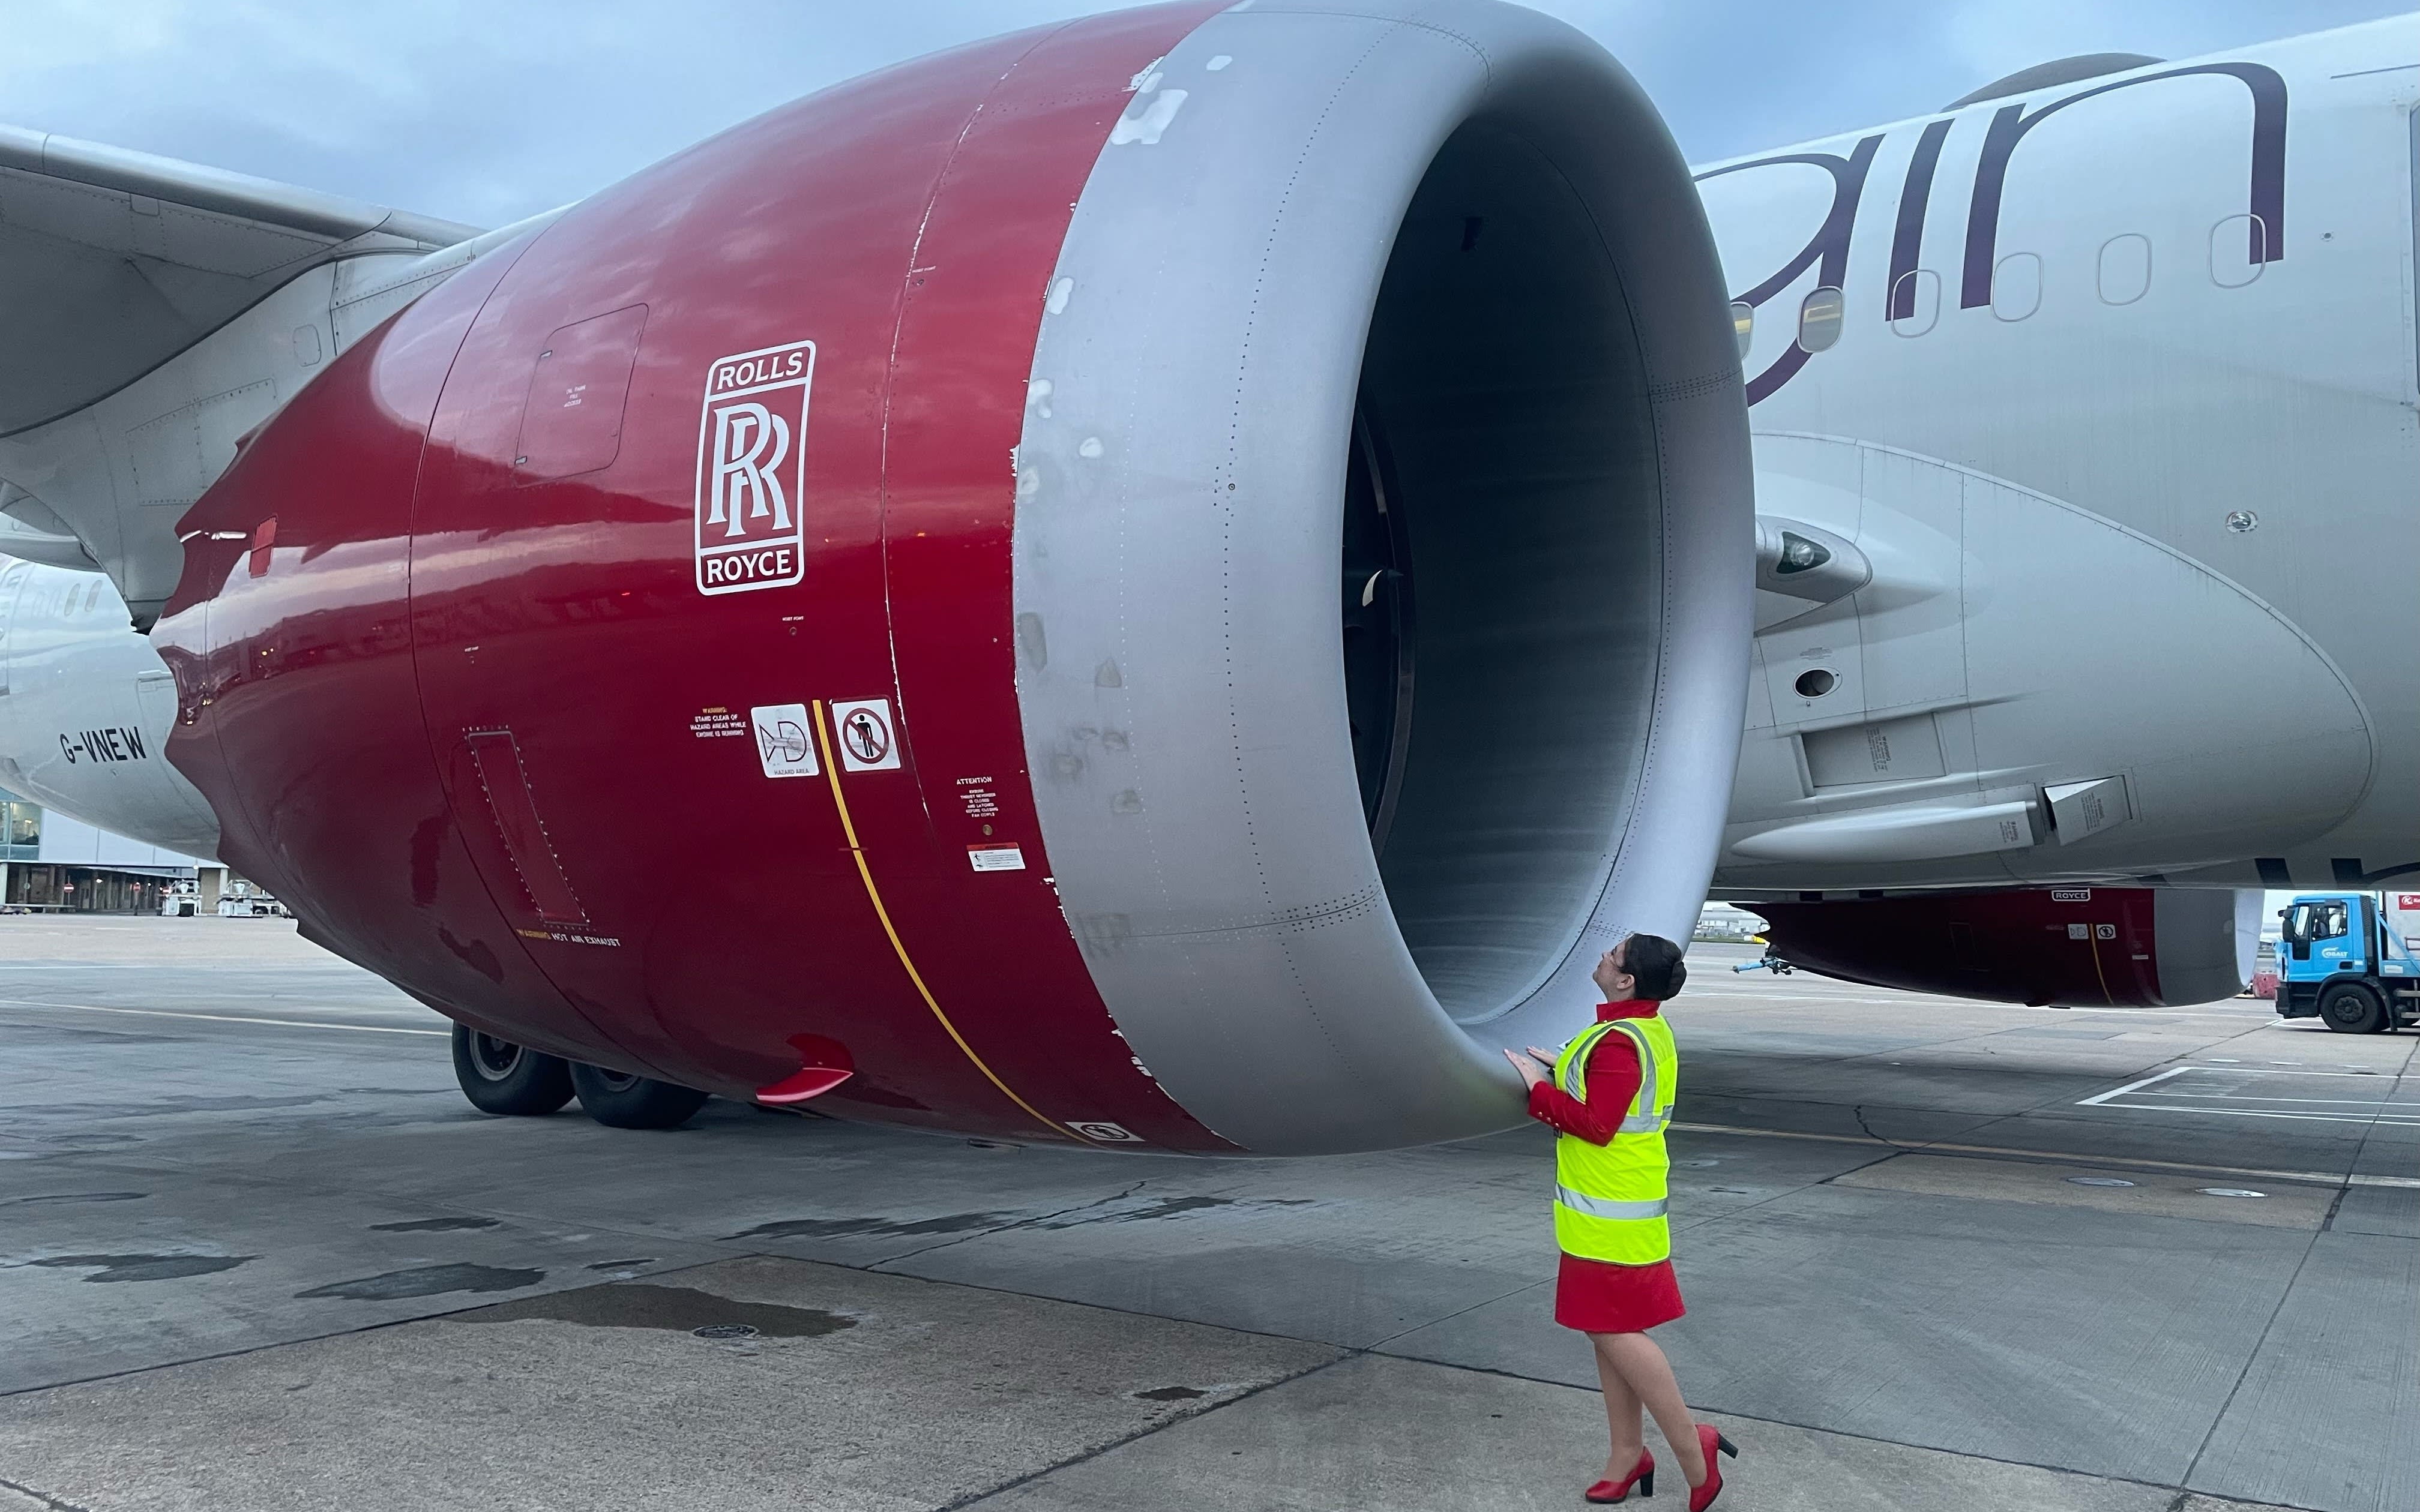 An image of cabin crew Amber stood by a Virgin Atlantic engine